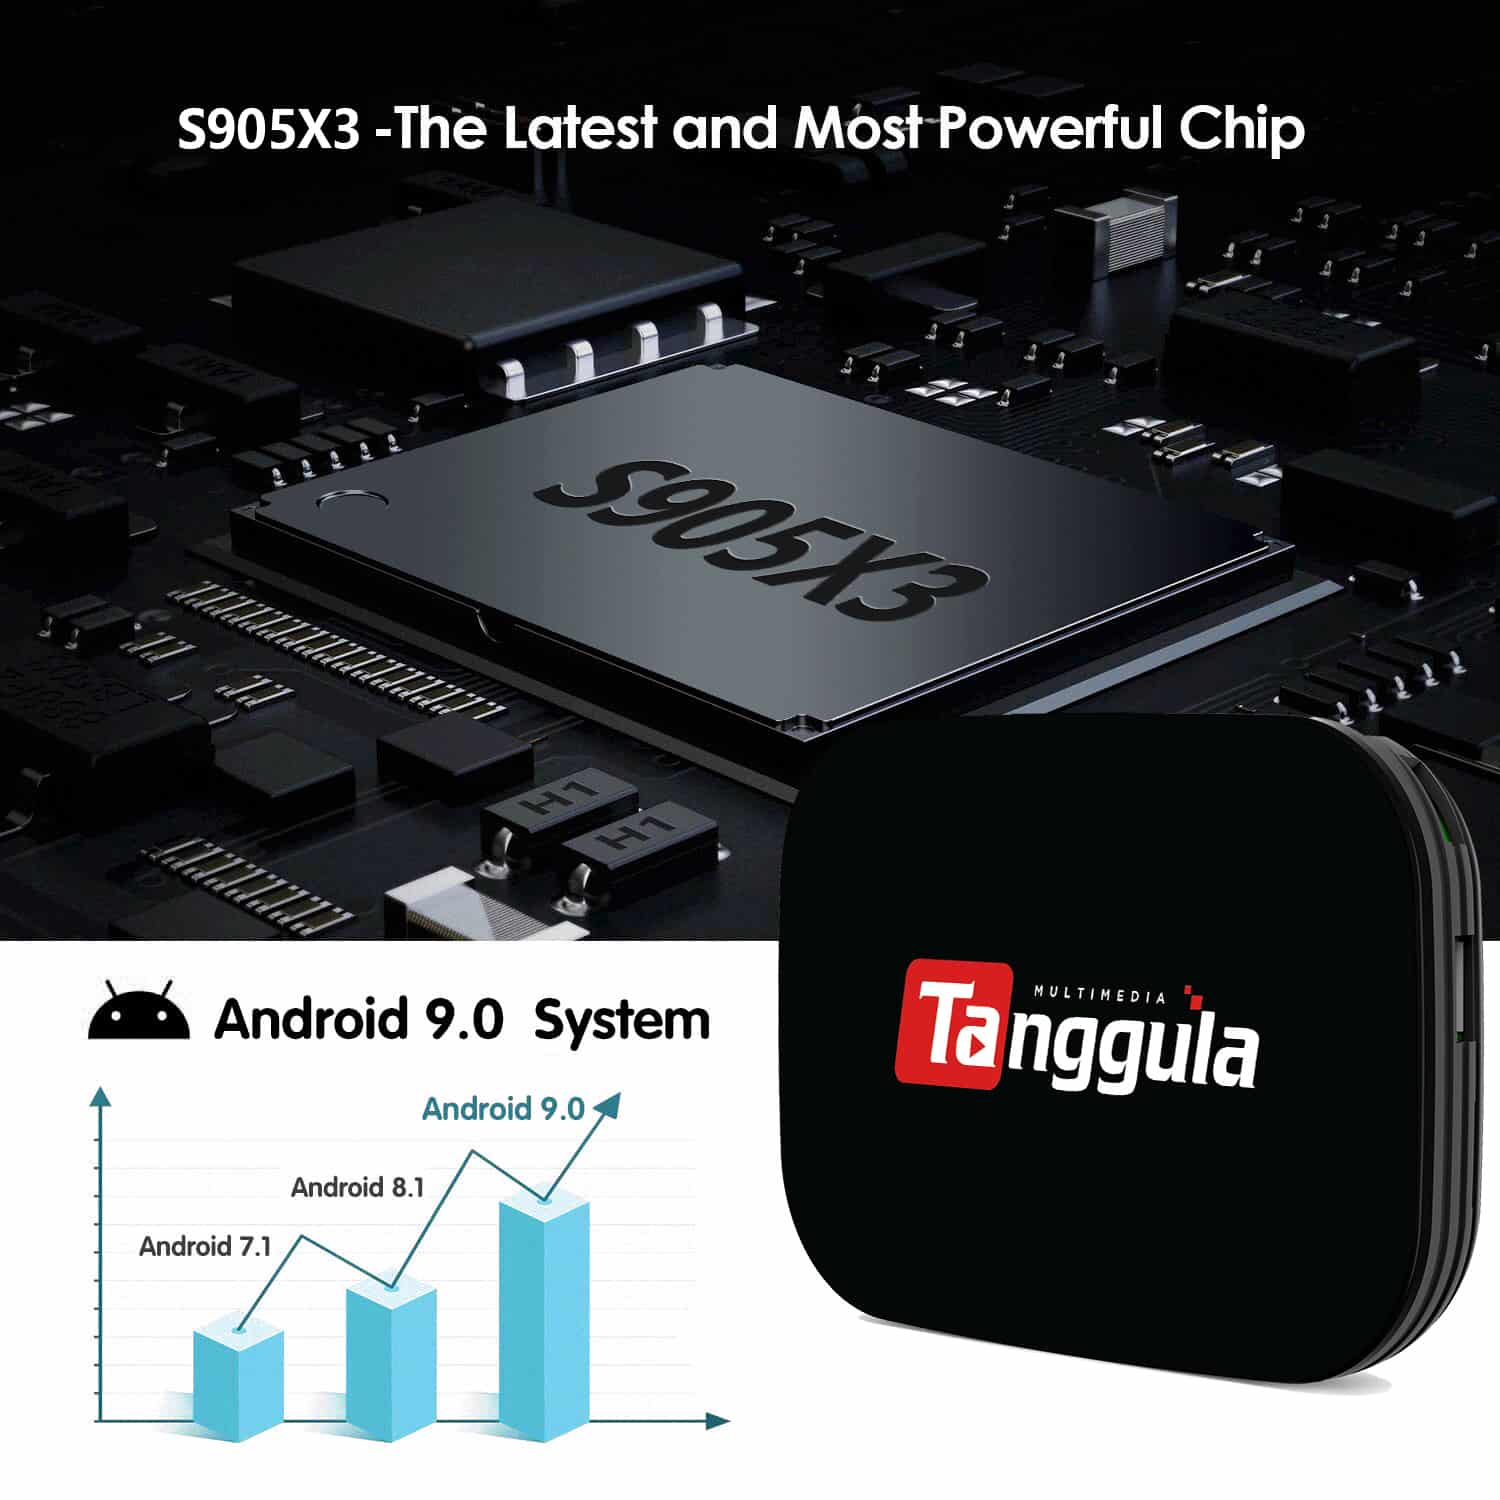 Tanggula X1 Series Android 9.0 TV Box IPTV Device, No Monthly Subscription